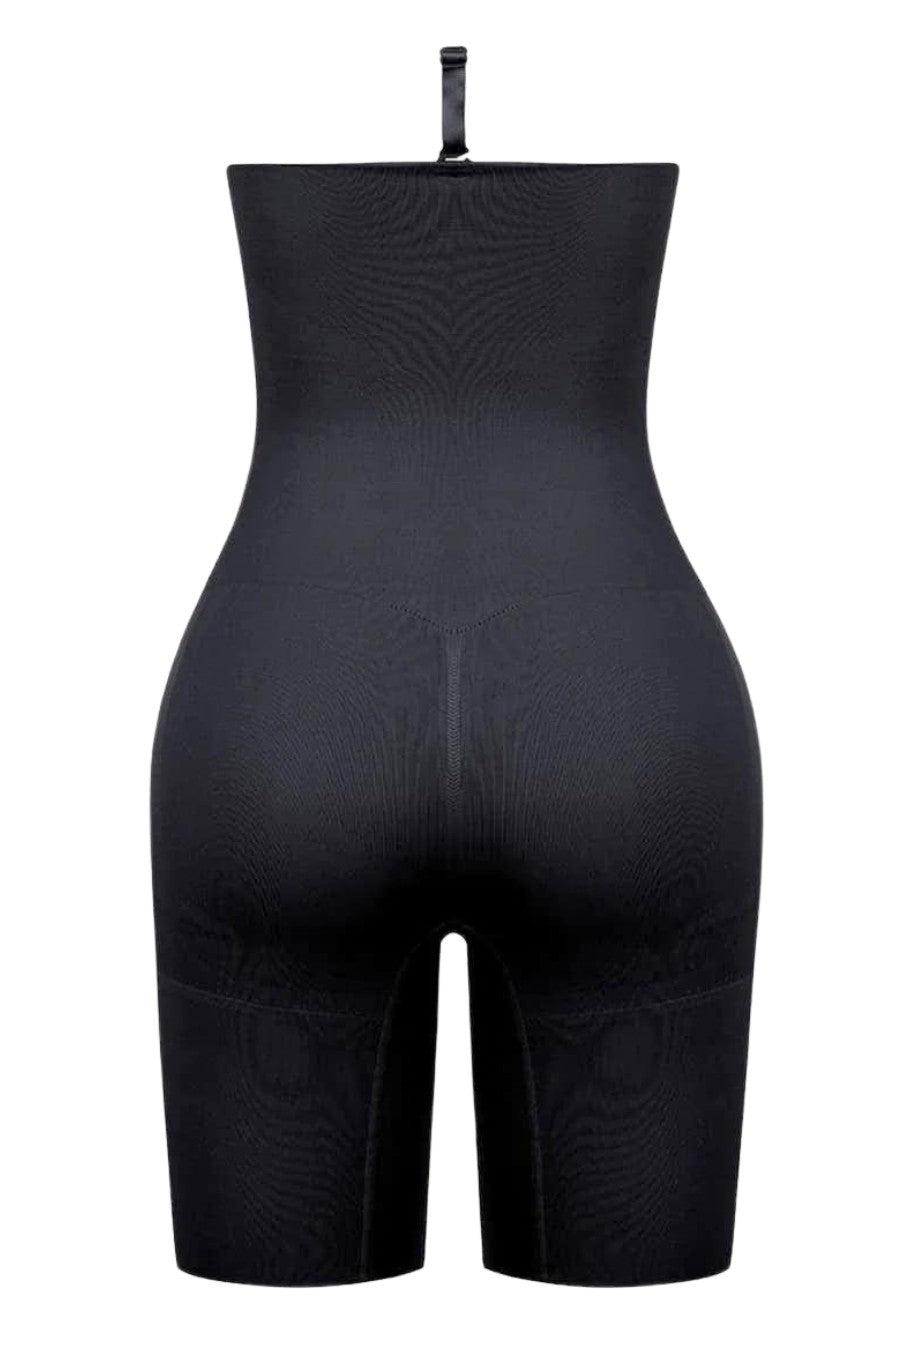 SAMPLE - Stomach & Thigh Shapers - XS/S Contour Clothing